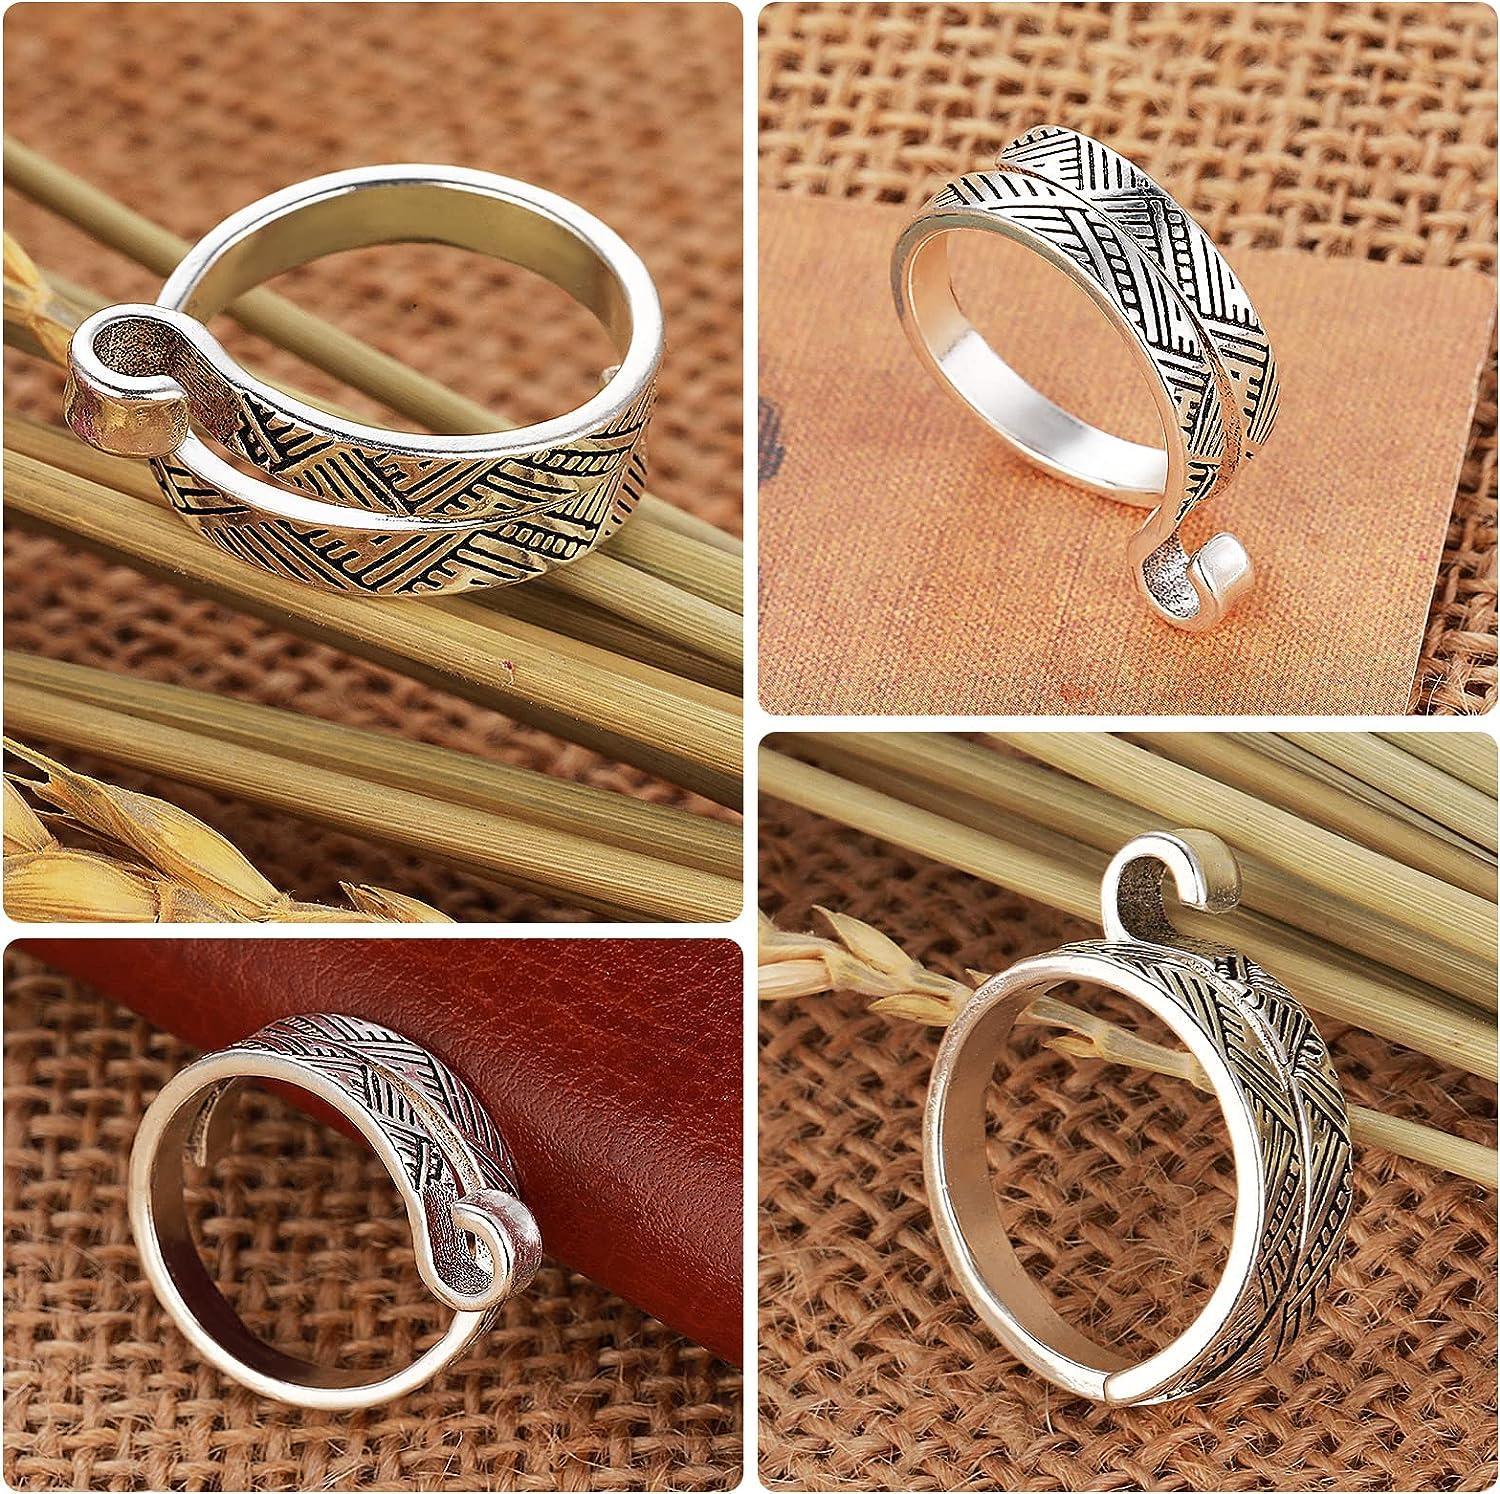 WLLHYF 4PCS Knitting Crochet Loop Ring Adjustable Crochet Loop Ring Hook  Braided Knitting Ring Yarn Guide Finger Holder Knitting Craft Accessories  Tools for Mother Grandma Presents(gold/silver-4pcs